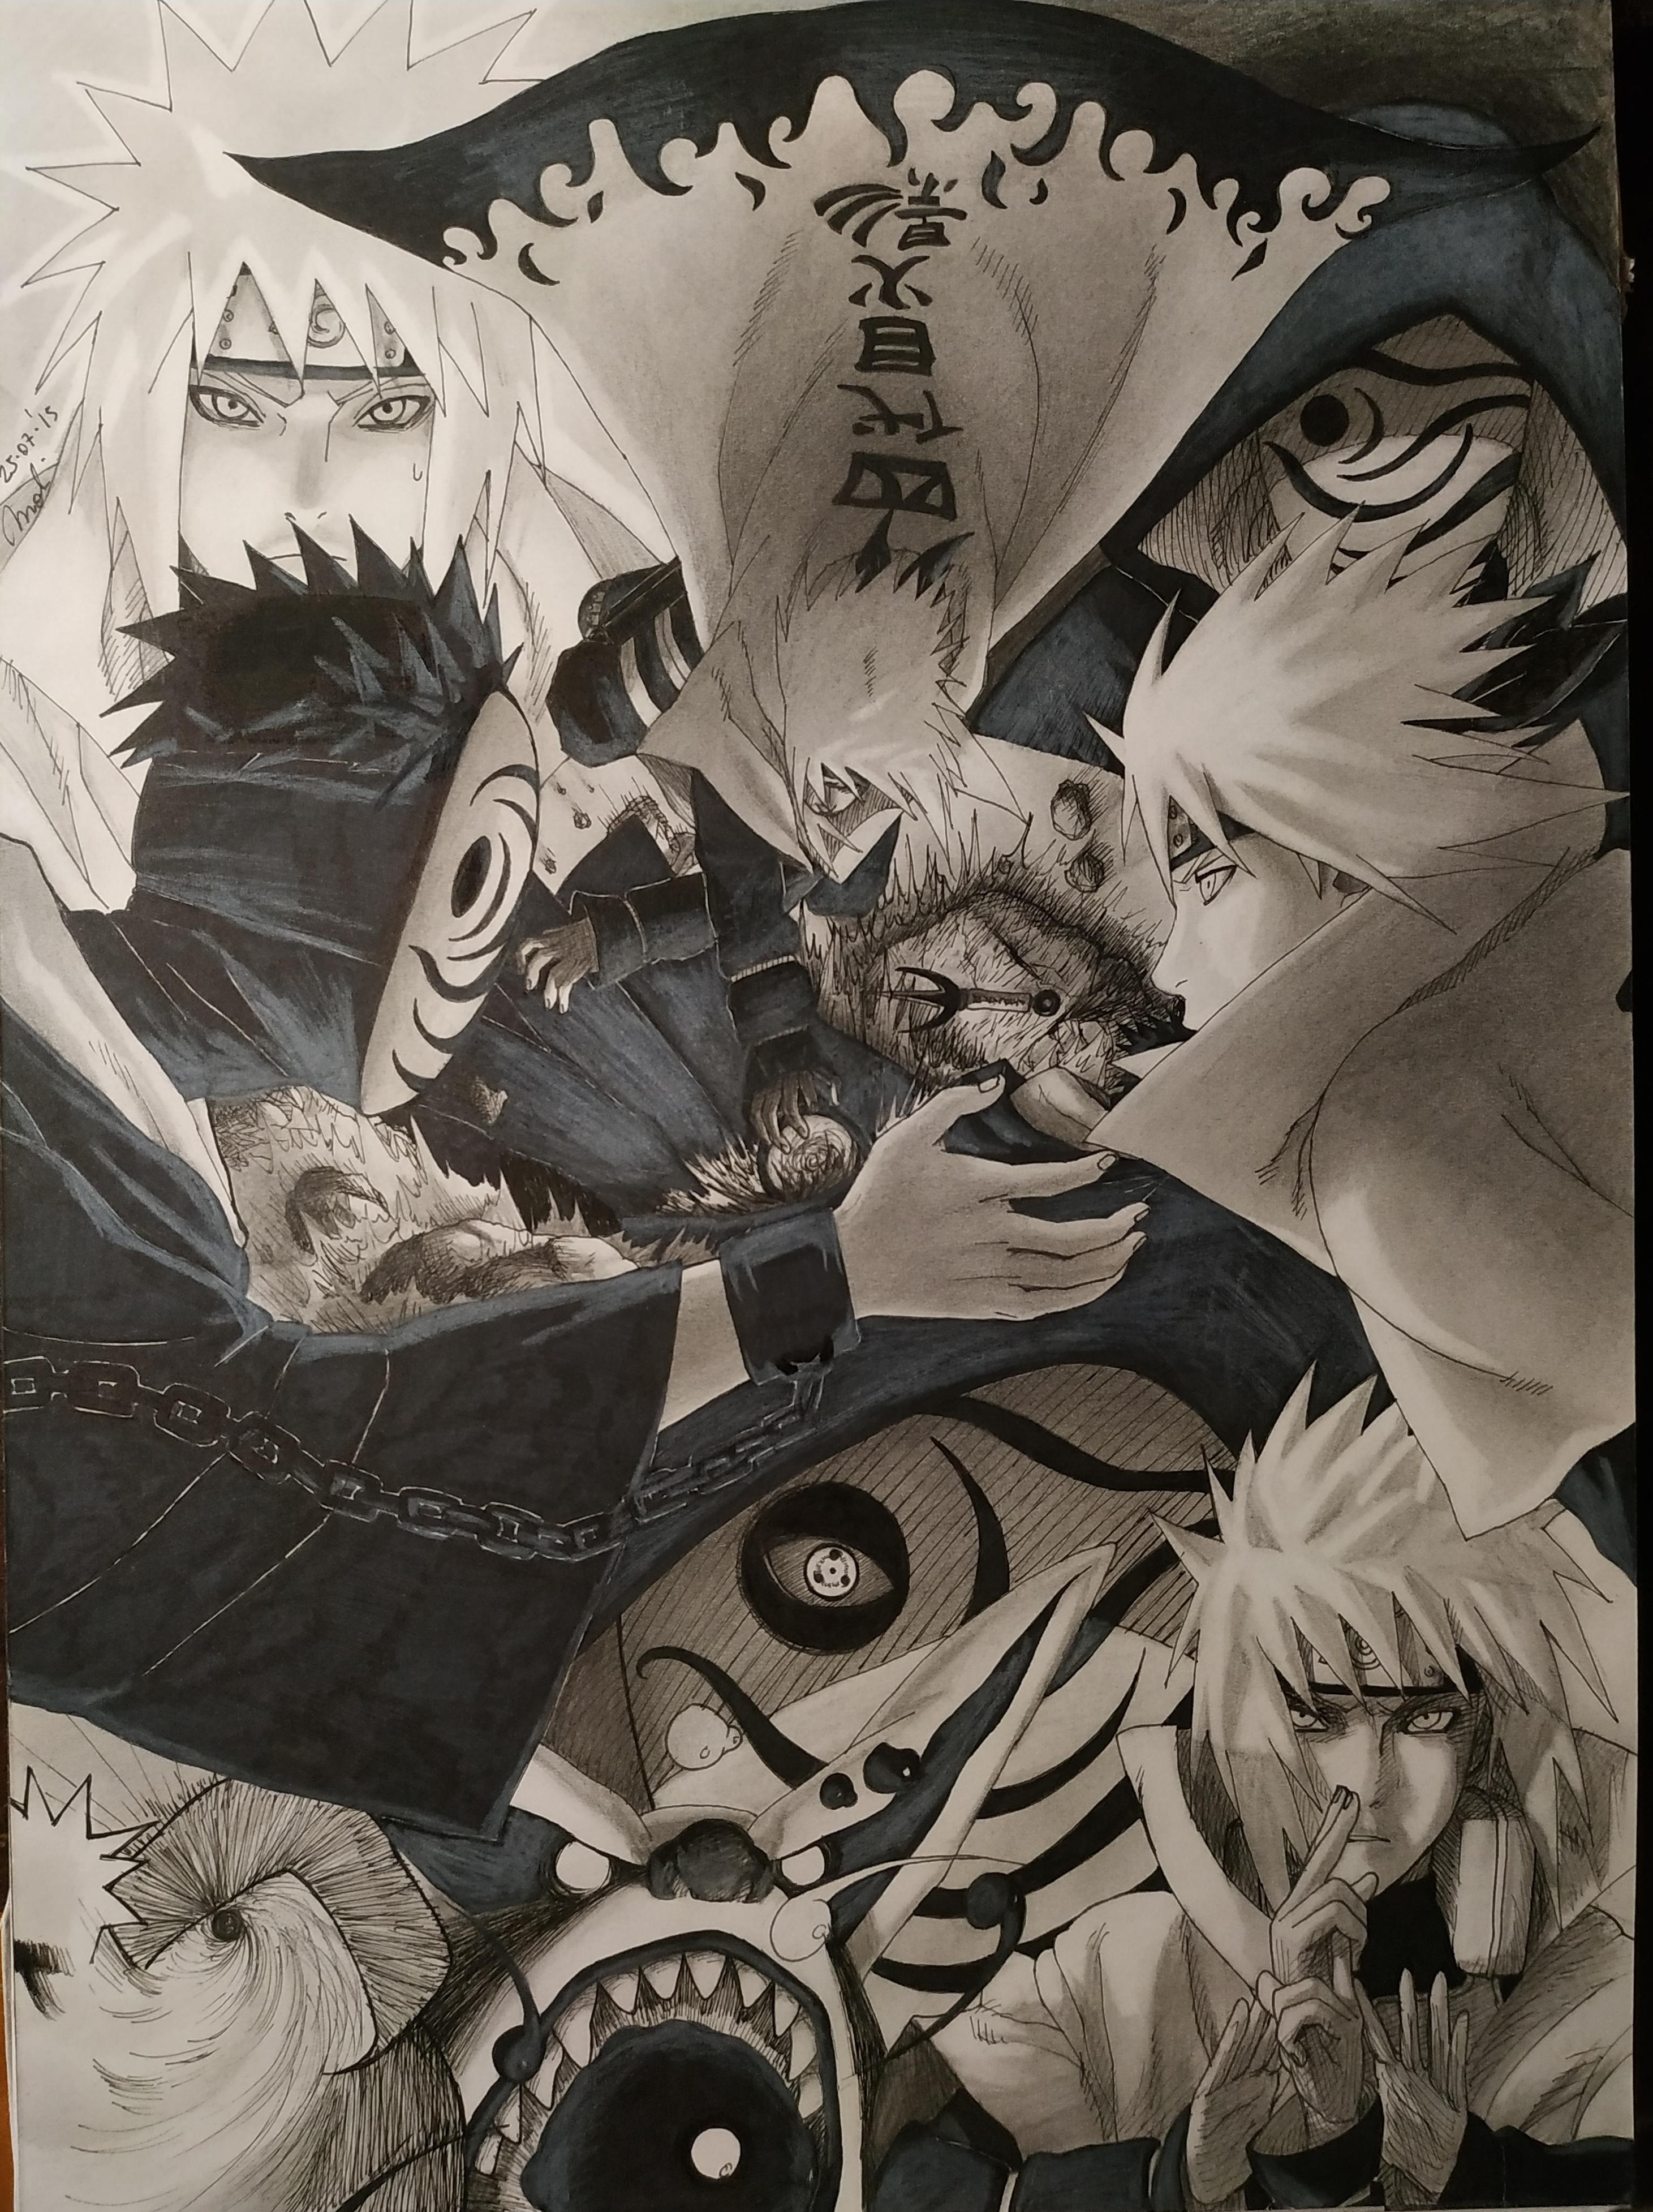 Minato VS Tobi. He Fights For The Village! By Me Ff.mychael 2014. Loved These Chapters Of The Manga. Minato Is So Cool. Love Every Characters In Truth Ahahah Hope You Like It